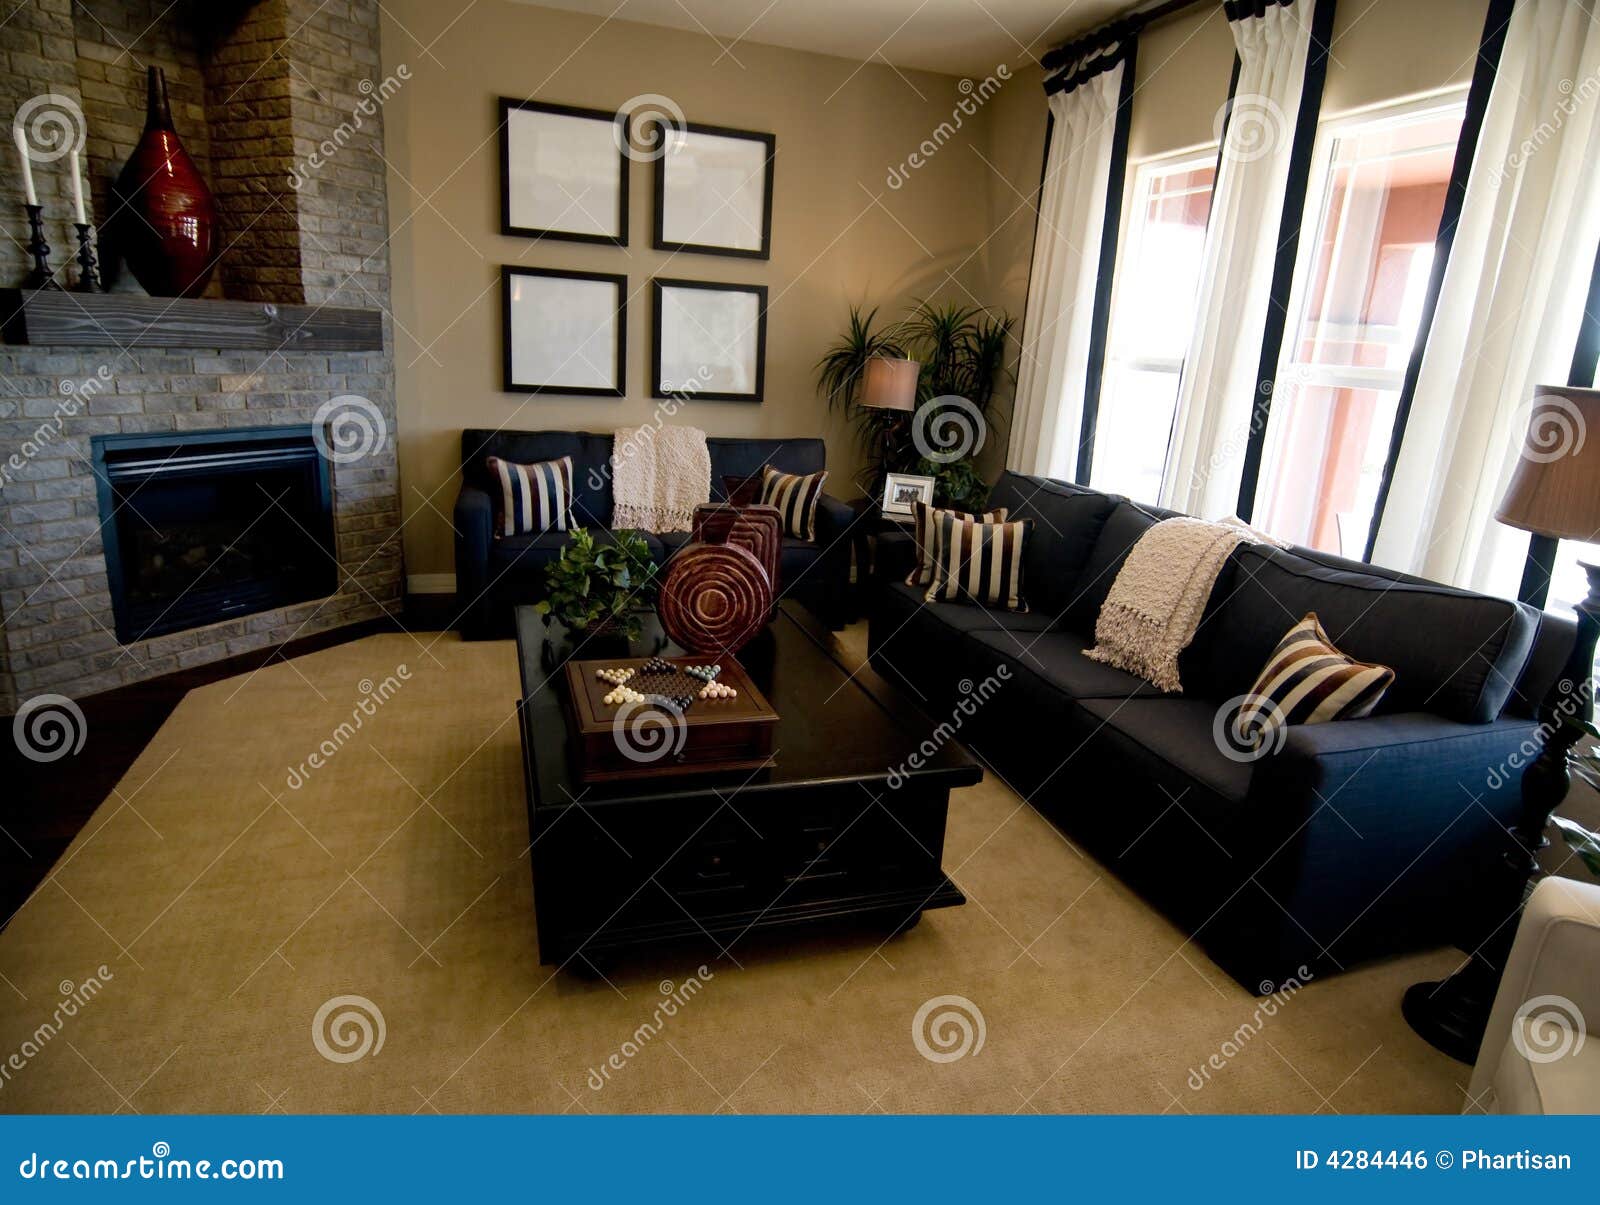 Large modern living room stock photo. Image of room, lamp - 4284446